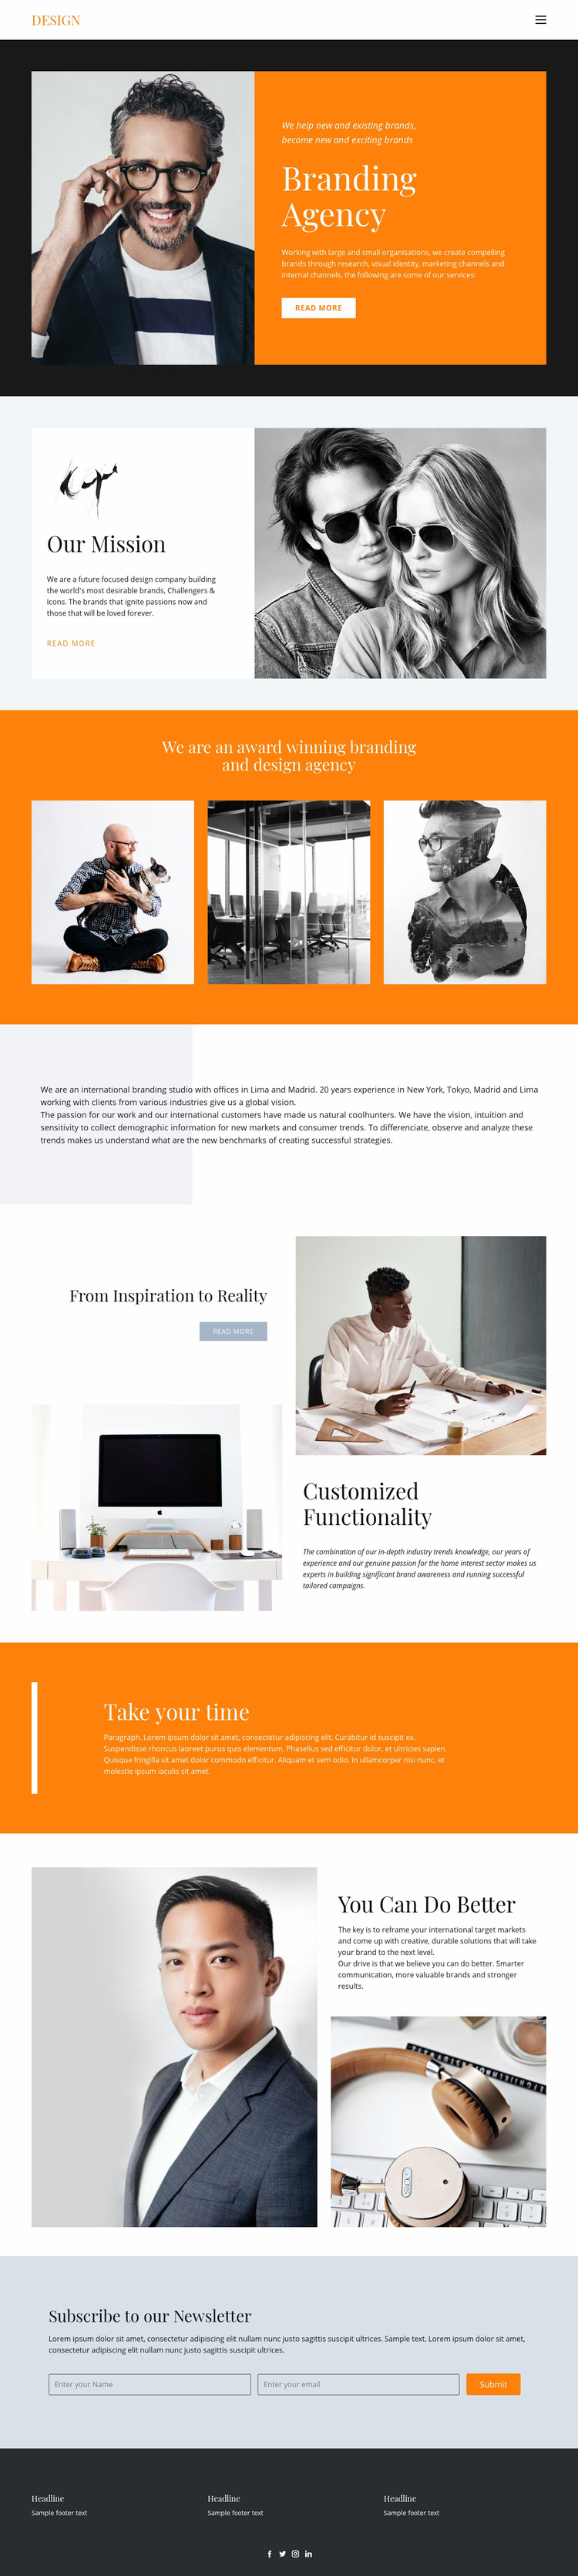 Desired results in business Wix Template Alternative